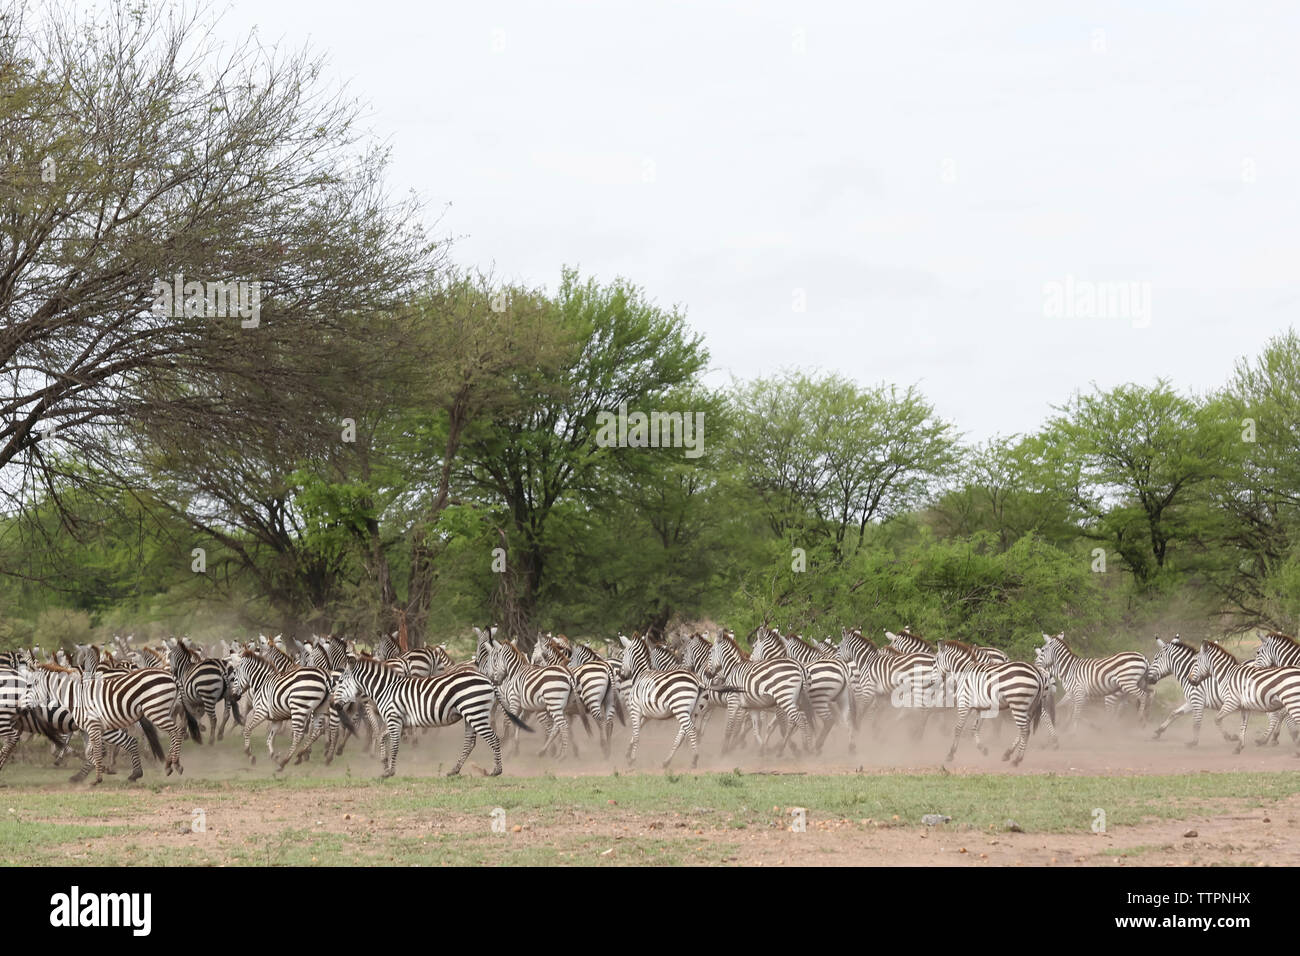 Zebras running on field at Serengeti National Park against clear sky Stock Photo